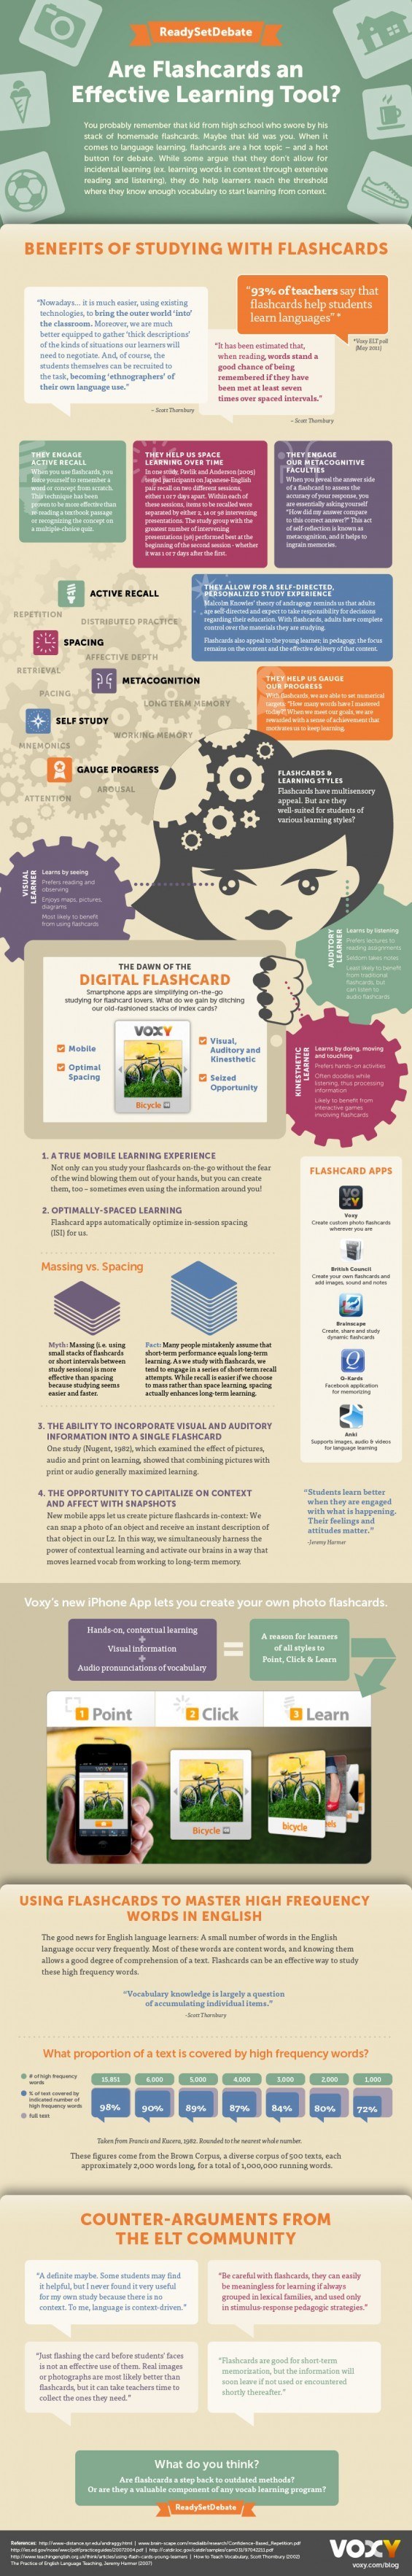 Why Use Flashcards as a Learning Tool Infographic